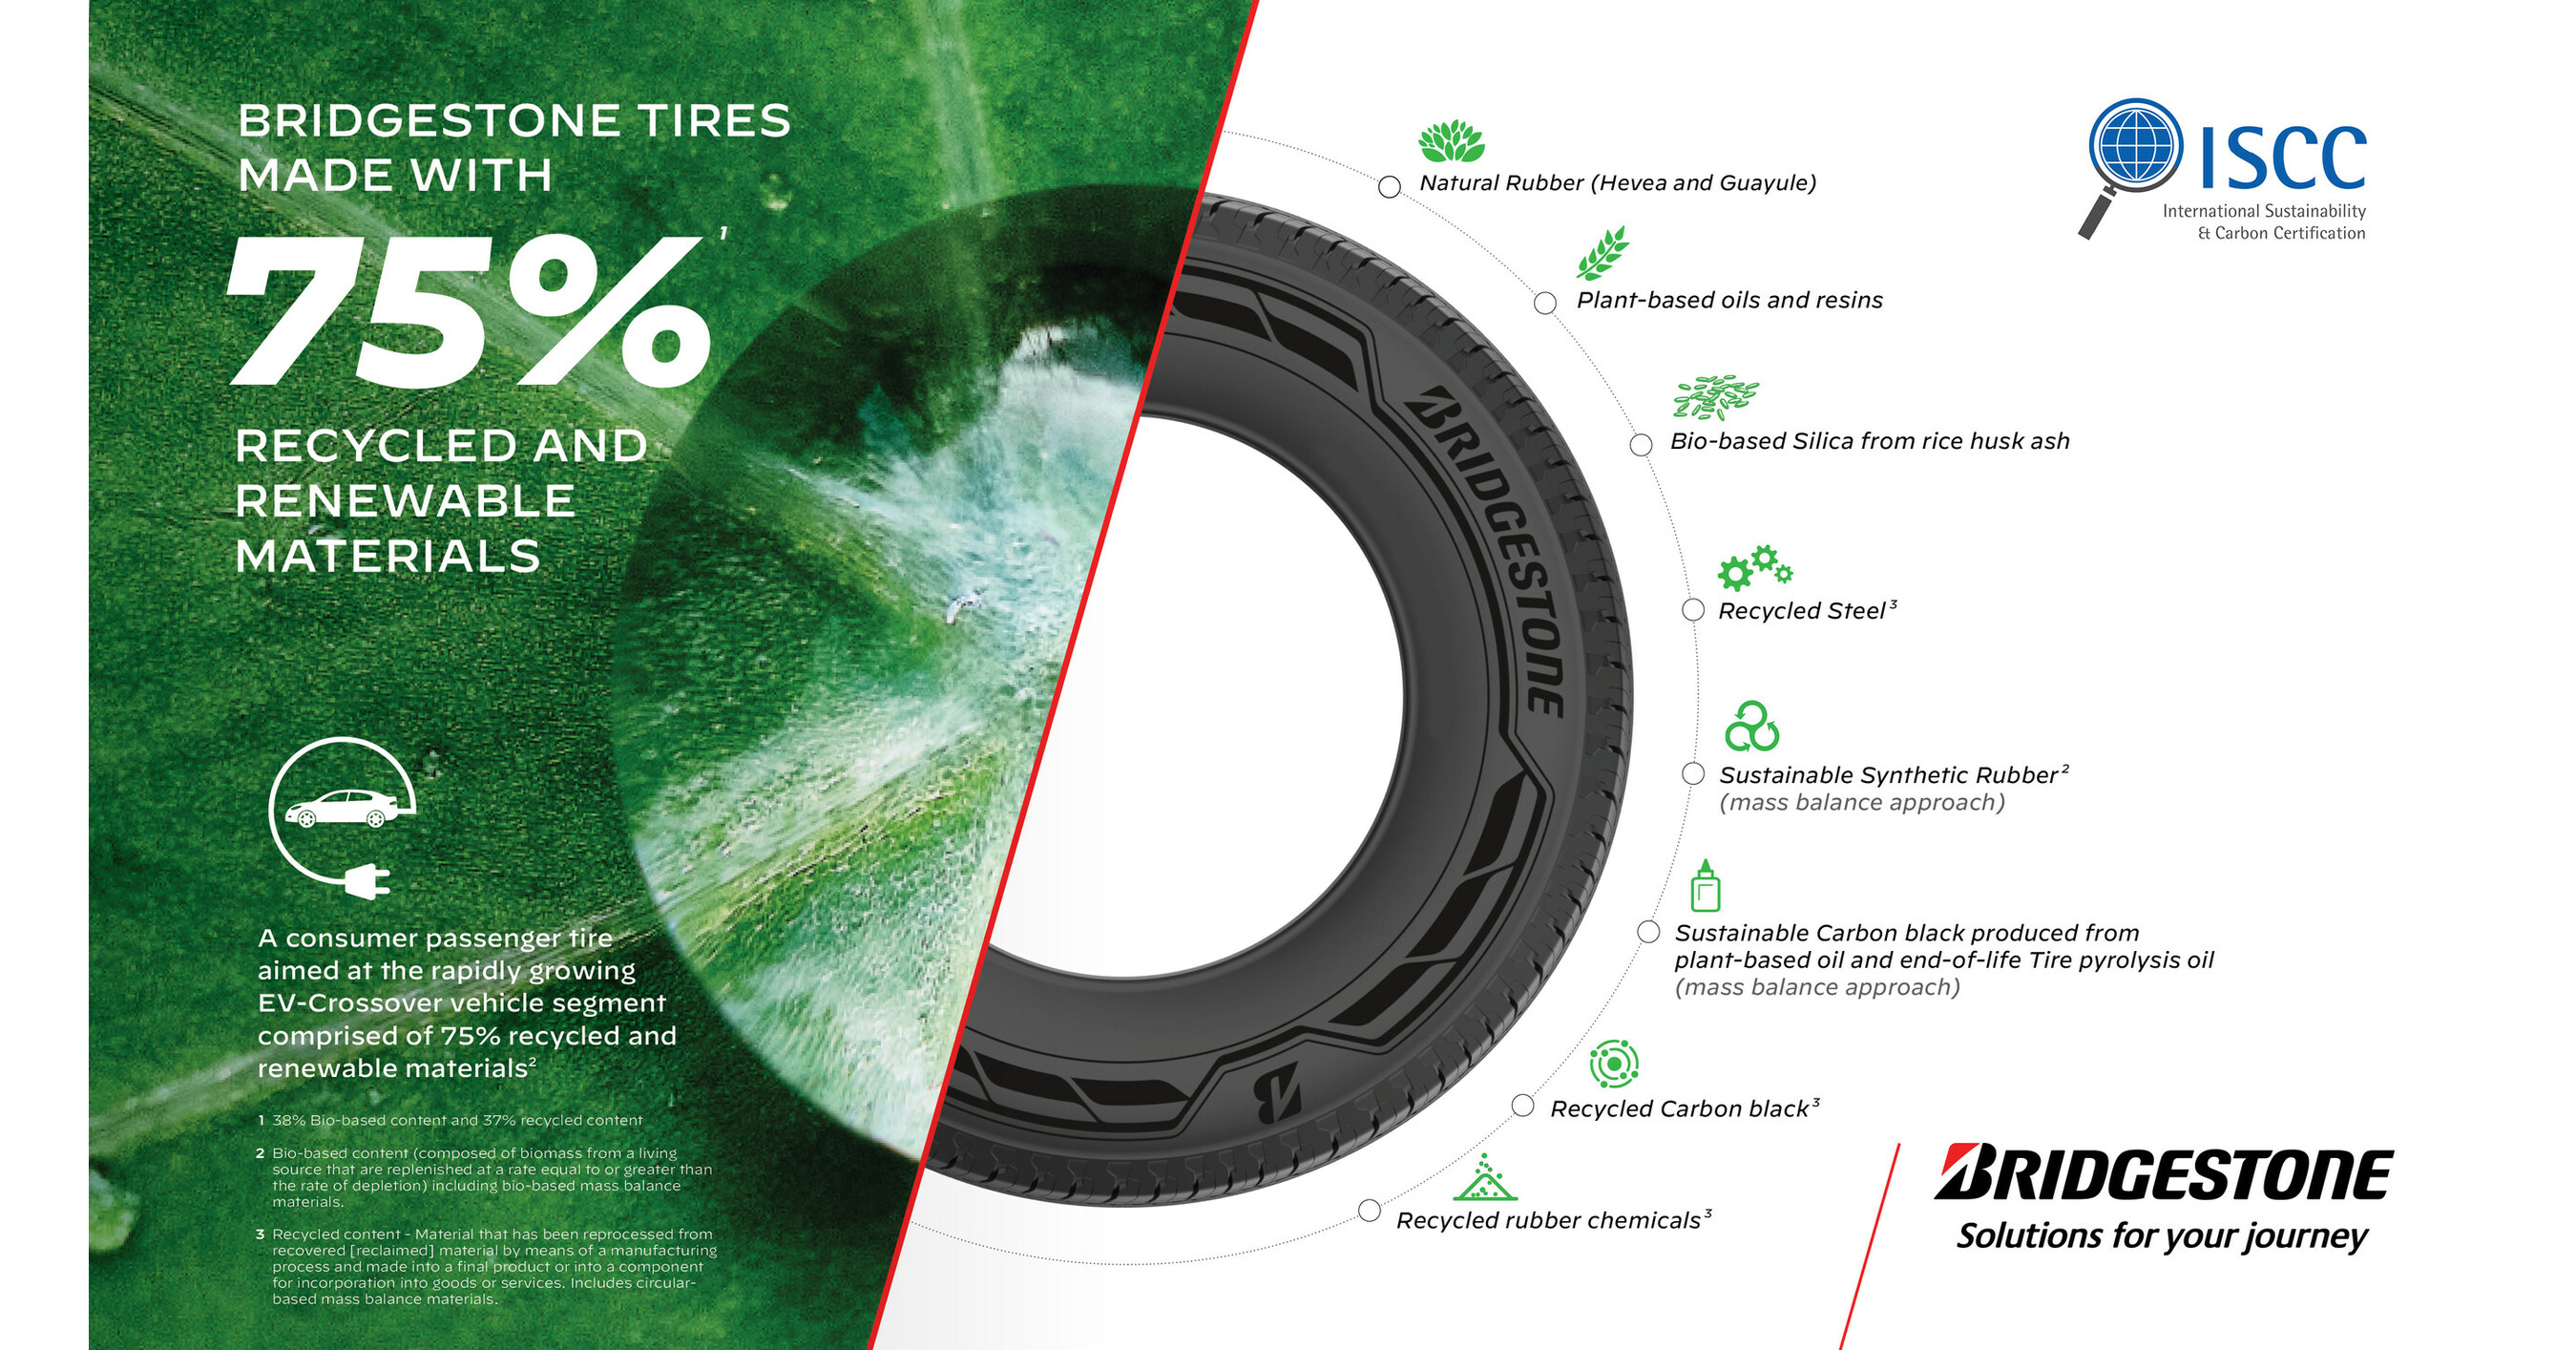 What Tires Are Made By Bridgestone